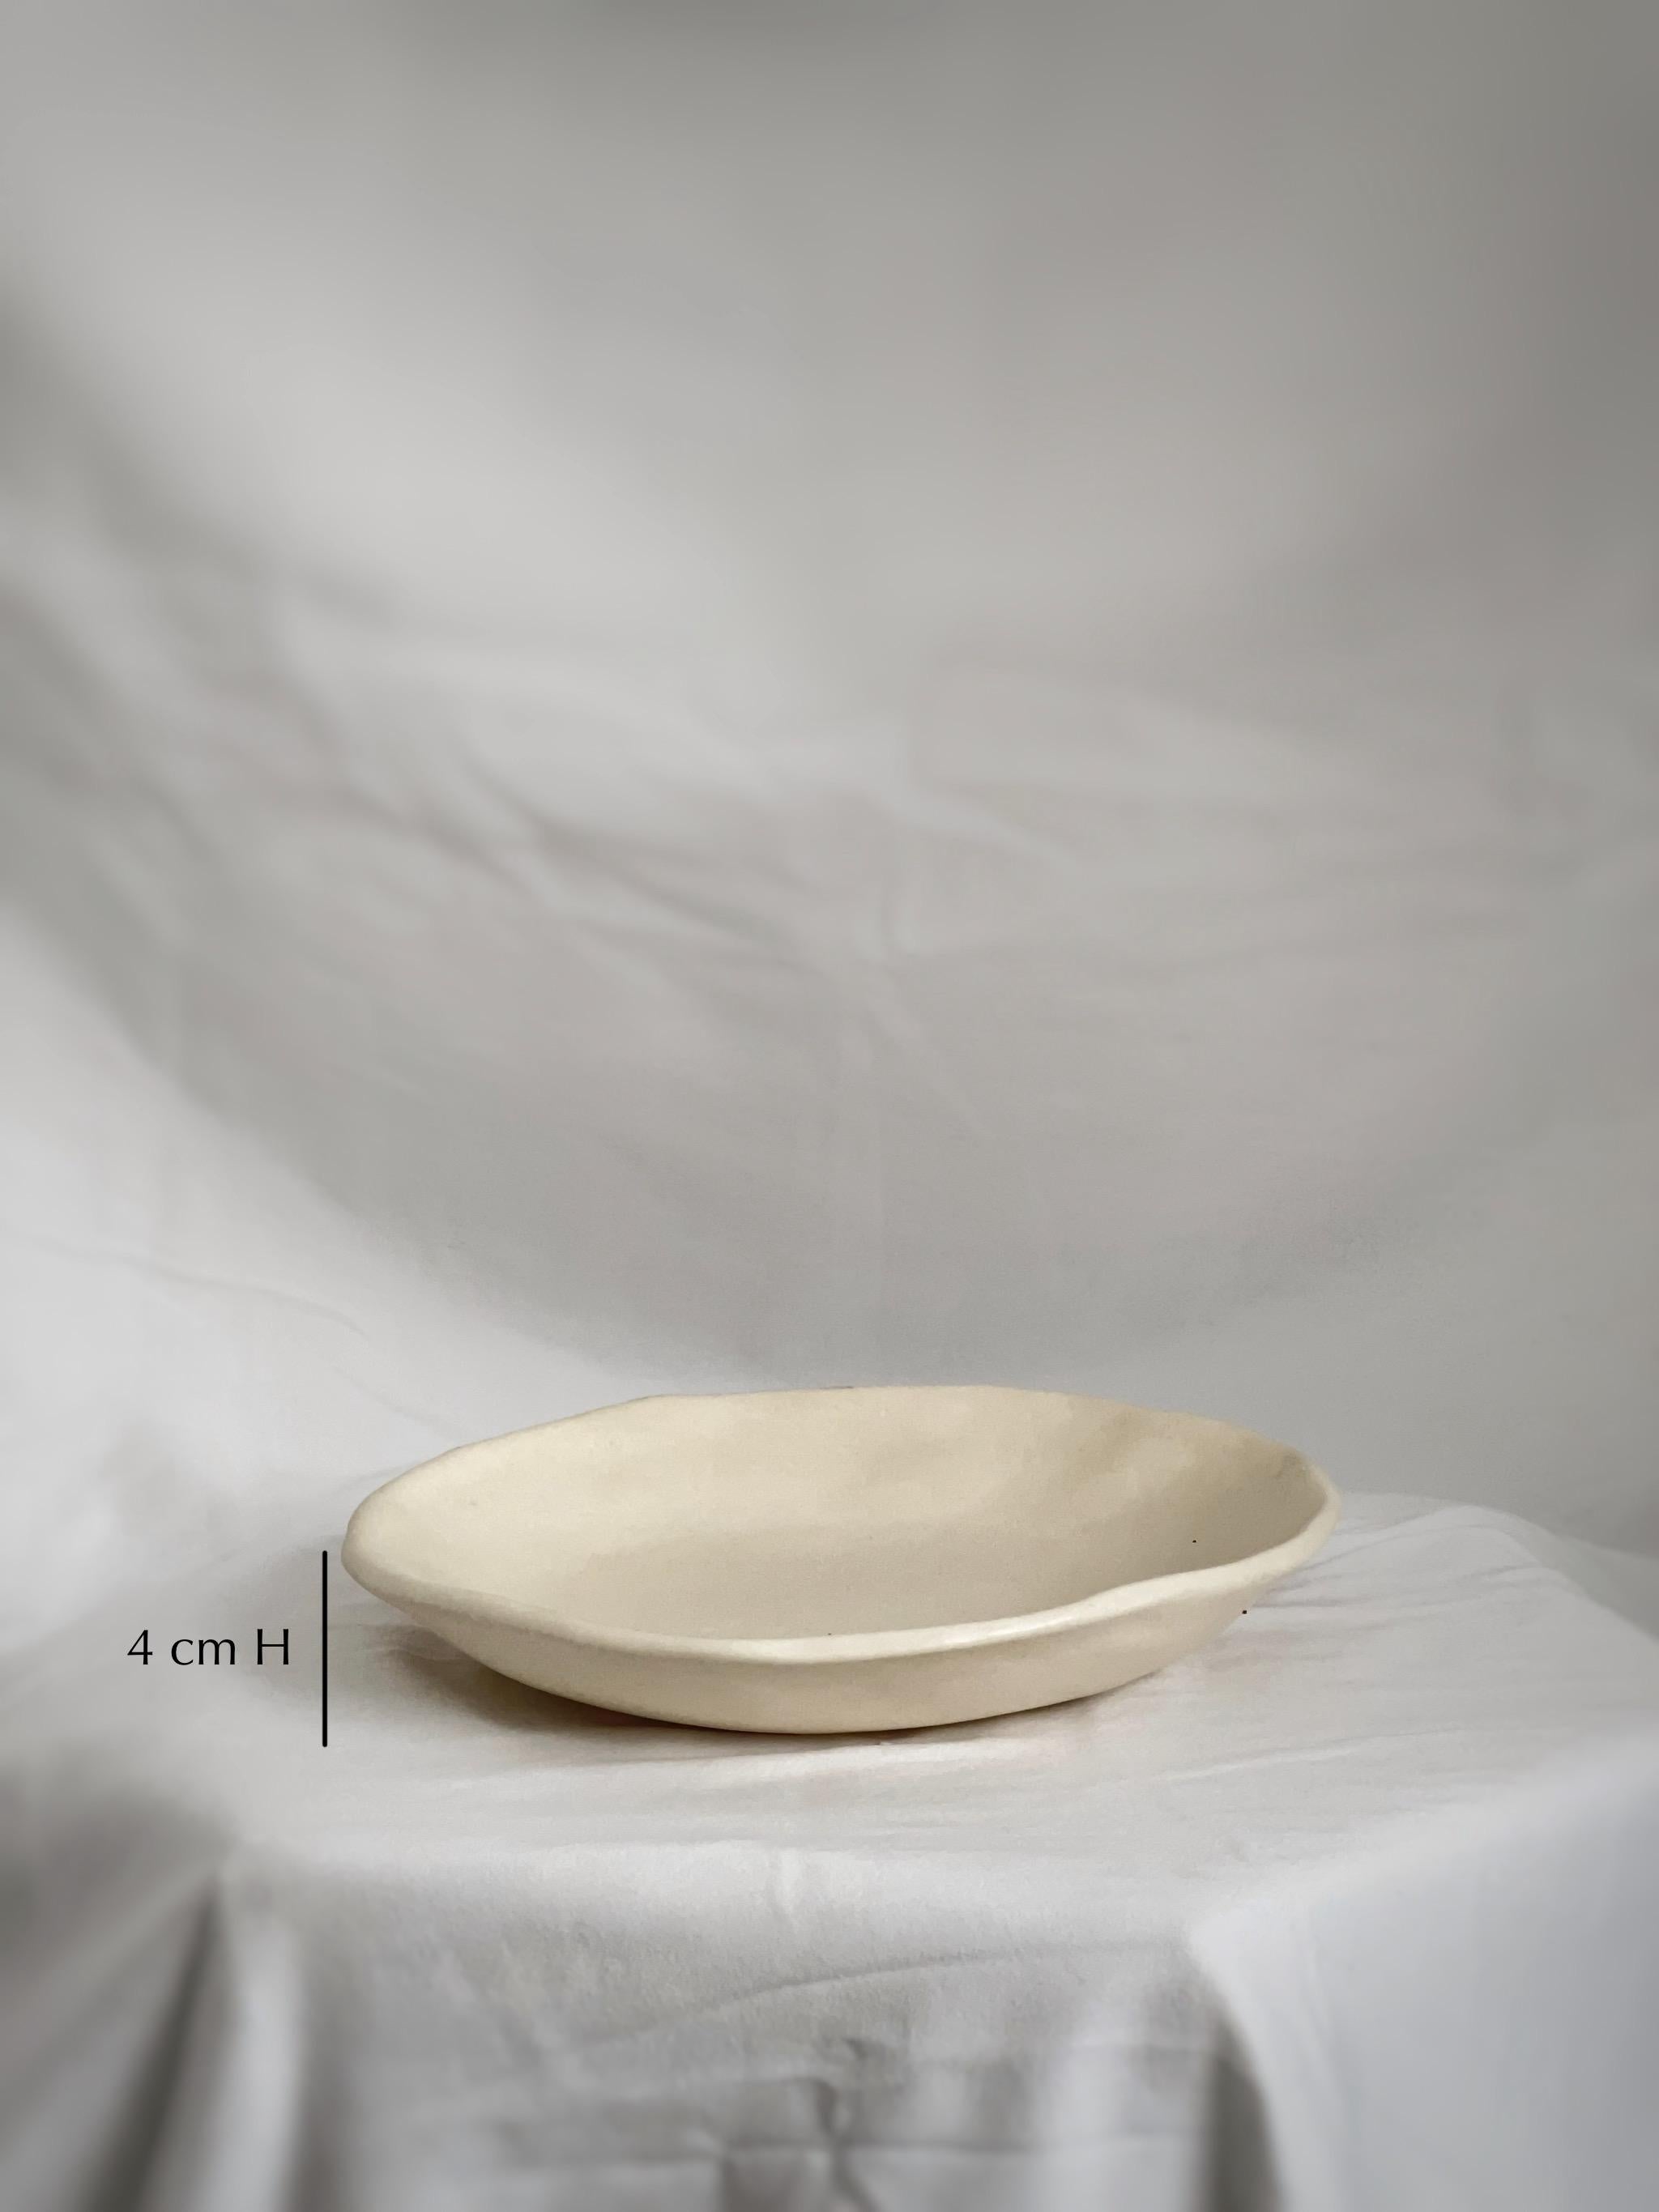 
Crafted in the heart of Tlaquepaque, Jalisco, this exquisite set of three ceramic plates stands as a testament to authenticity and artisanal mastery. Available in elegant shades of natural white, serene green, and bold black, each plate in the